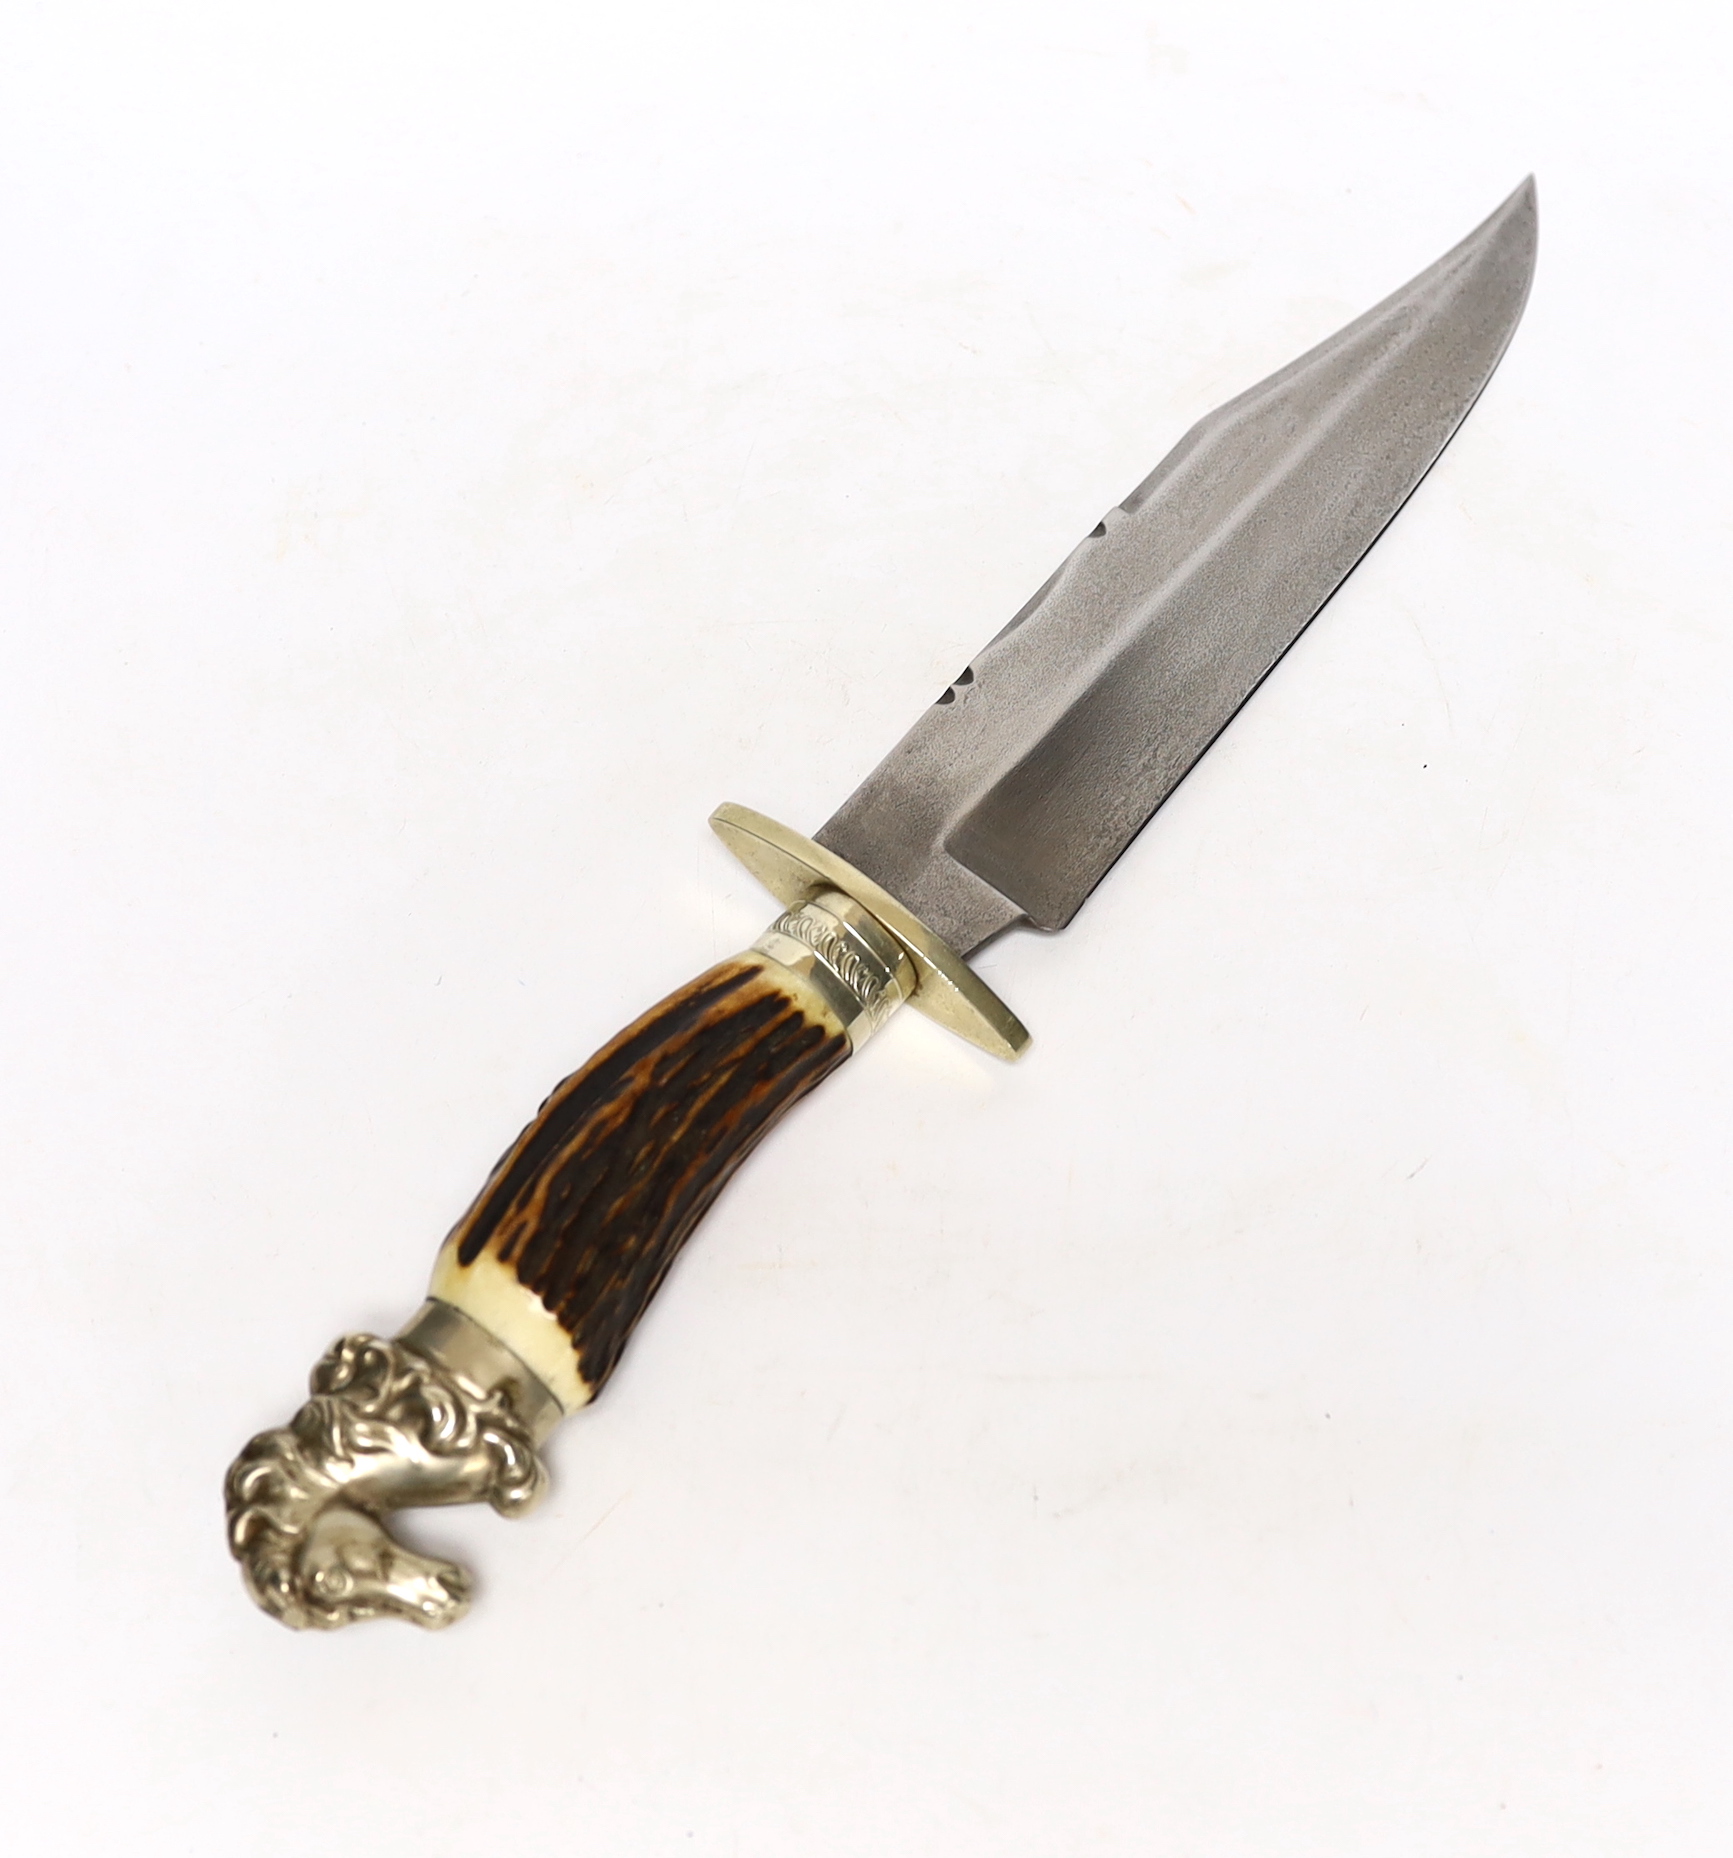 A James & Lowe Bowie knife, clip point blade with unsharpened false edge and decorative filework, stamped James & Lowe Sheffield, with Eagle, Cross and Star marks, stag horn handle with nickel silver guard, and horse-hea